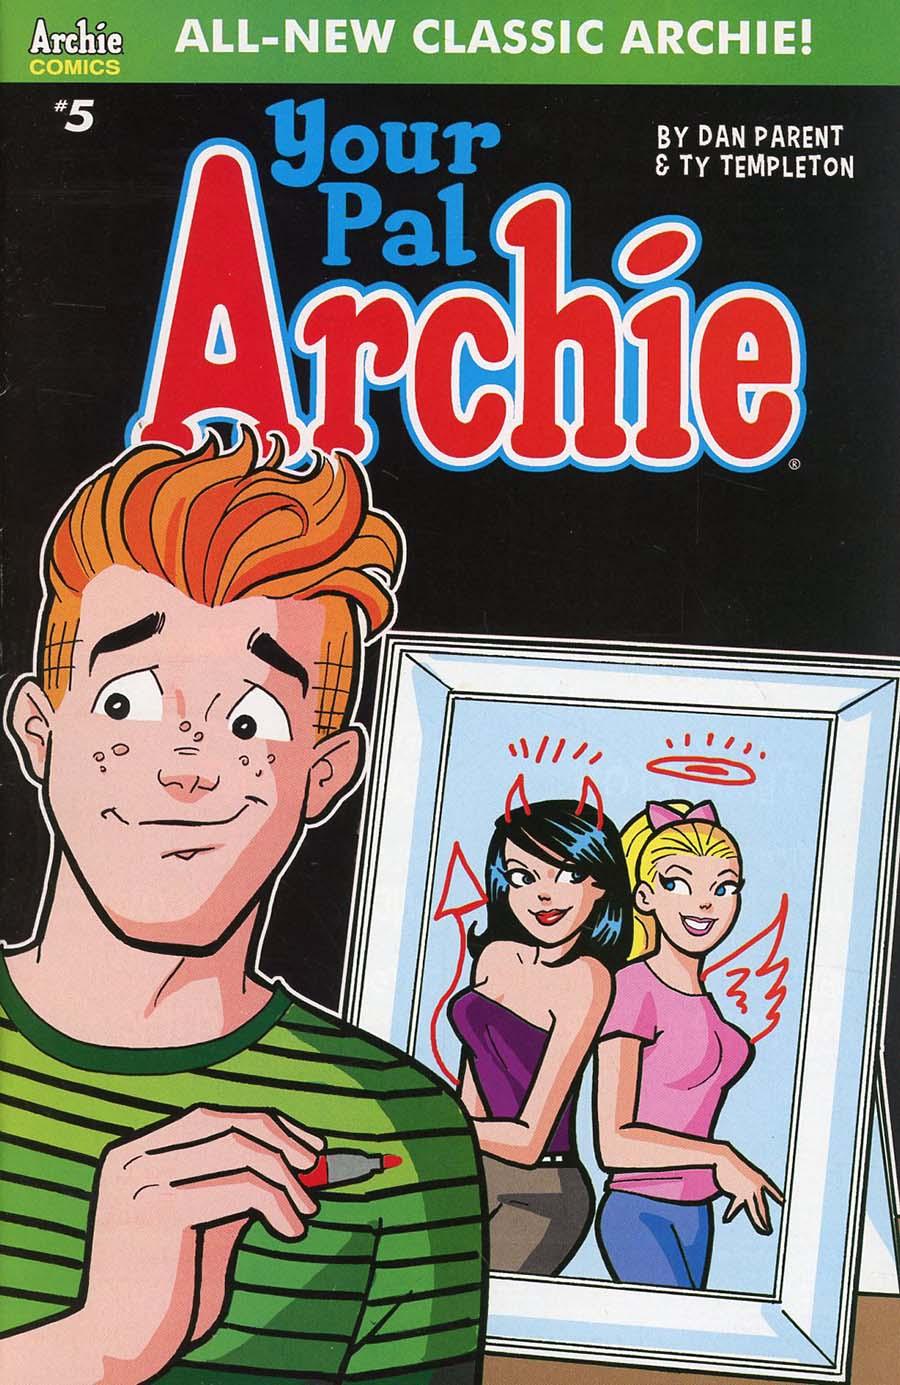 All-New Classic Archie Your Pal Archie Vol. 1 #5